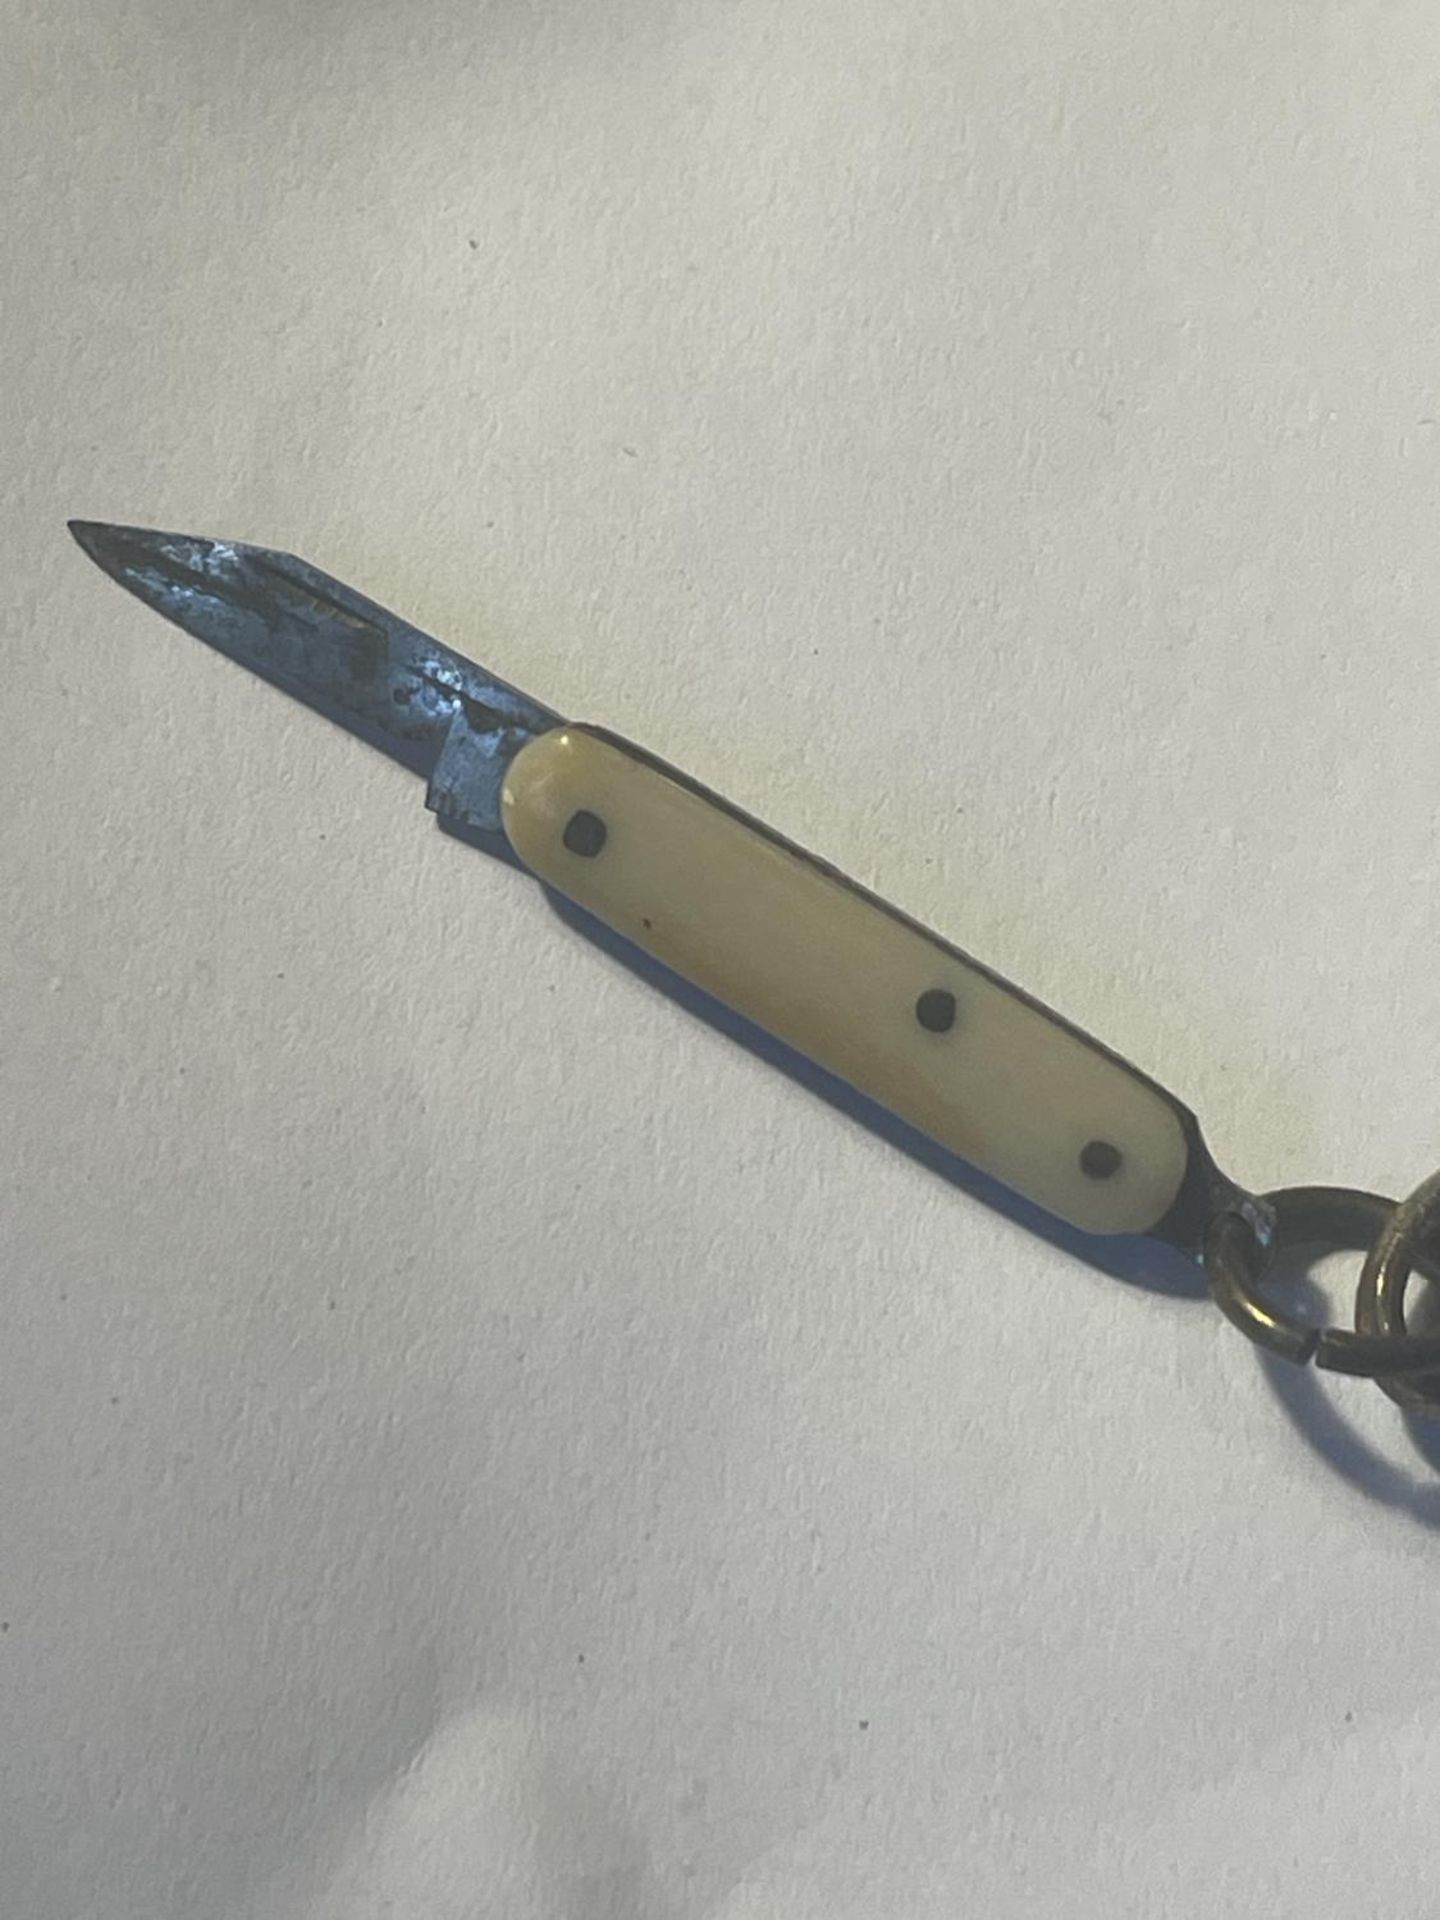 AN ANTIQUE PAIR OF MINIATURE SCISSORS IN A STORK DESIGN AND PEN KNIFE WITH A BROWN CASE LABELLED - Image 4 of 4